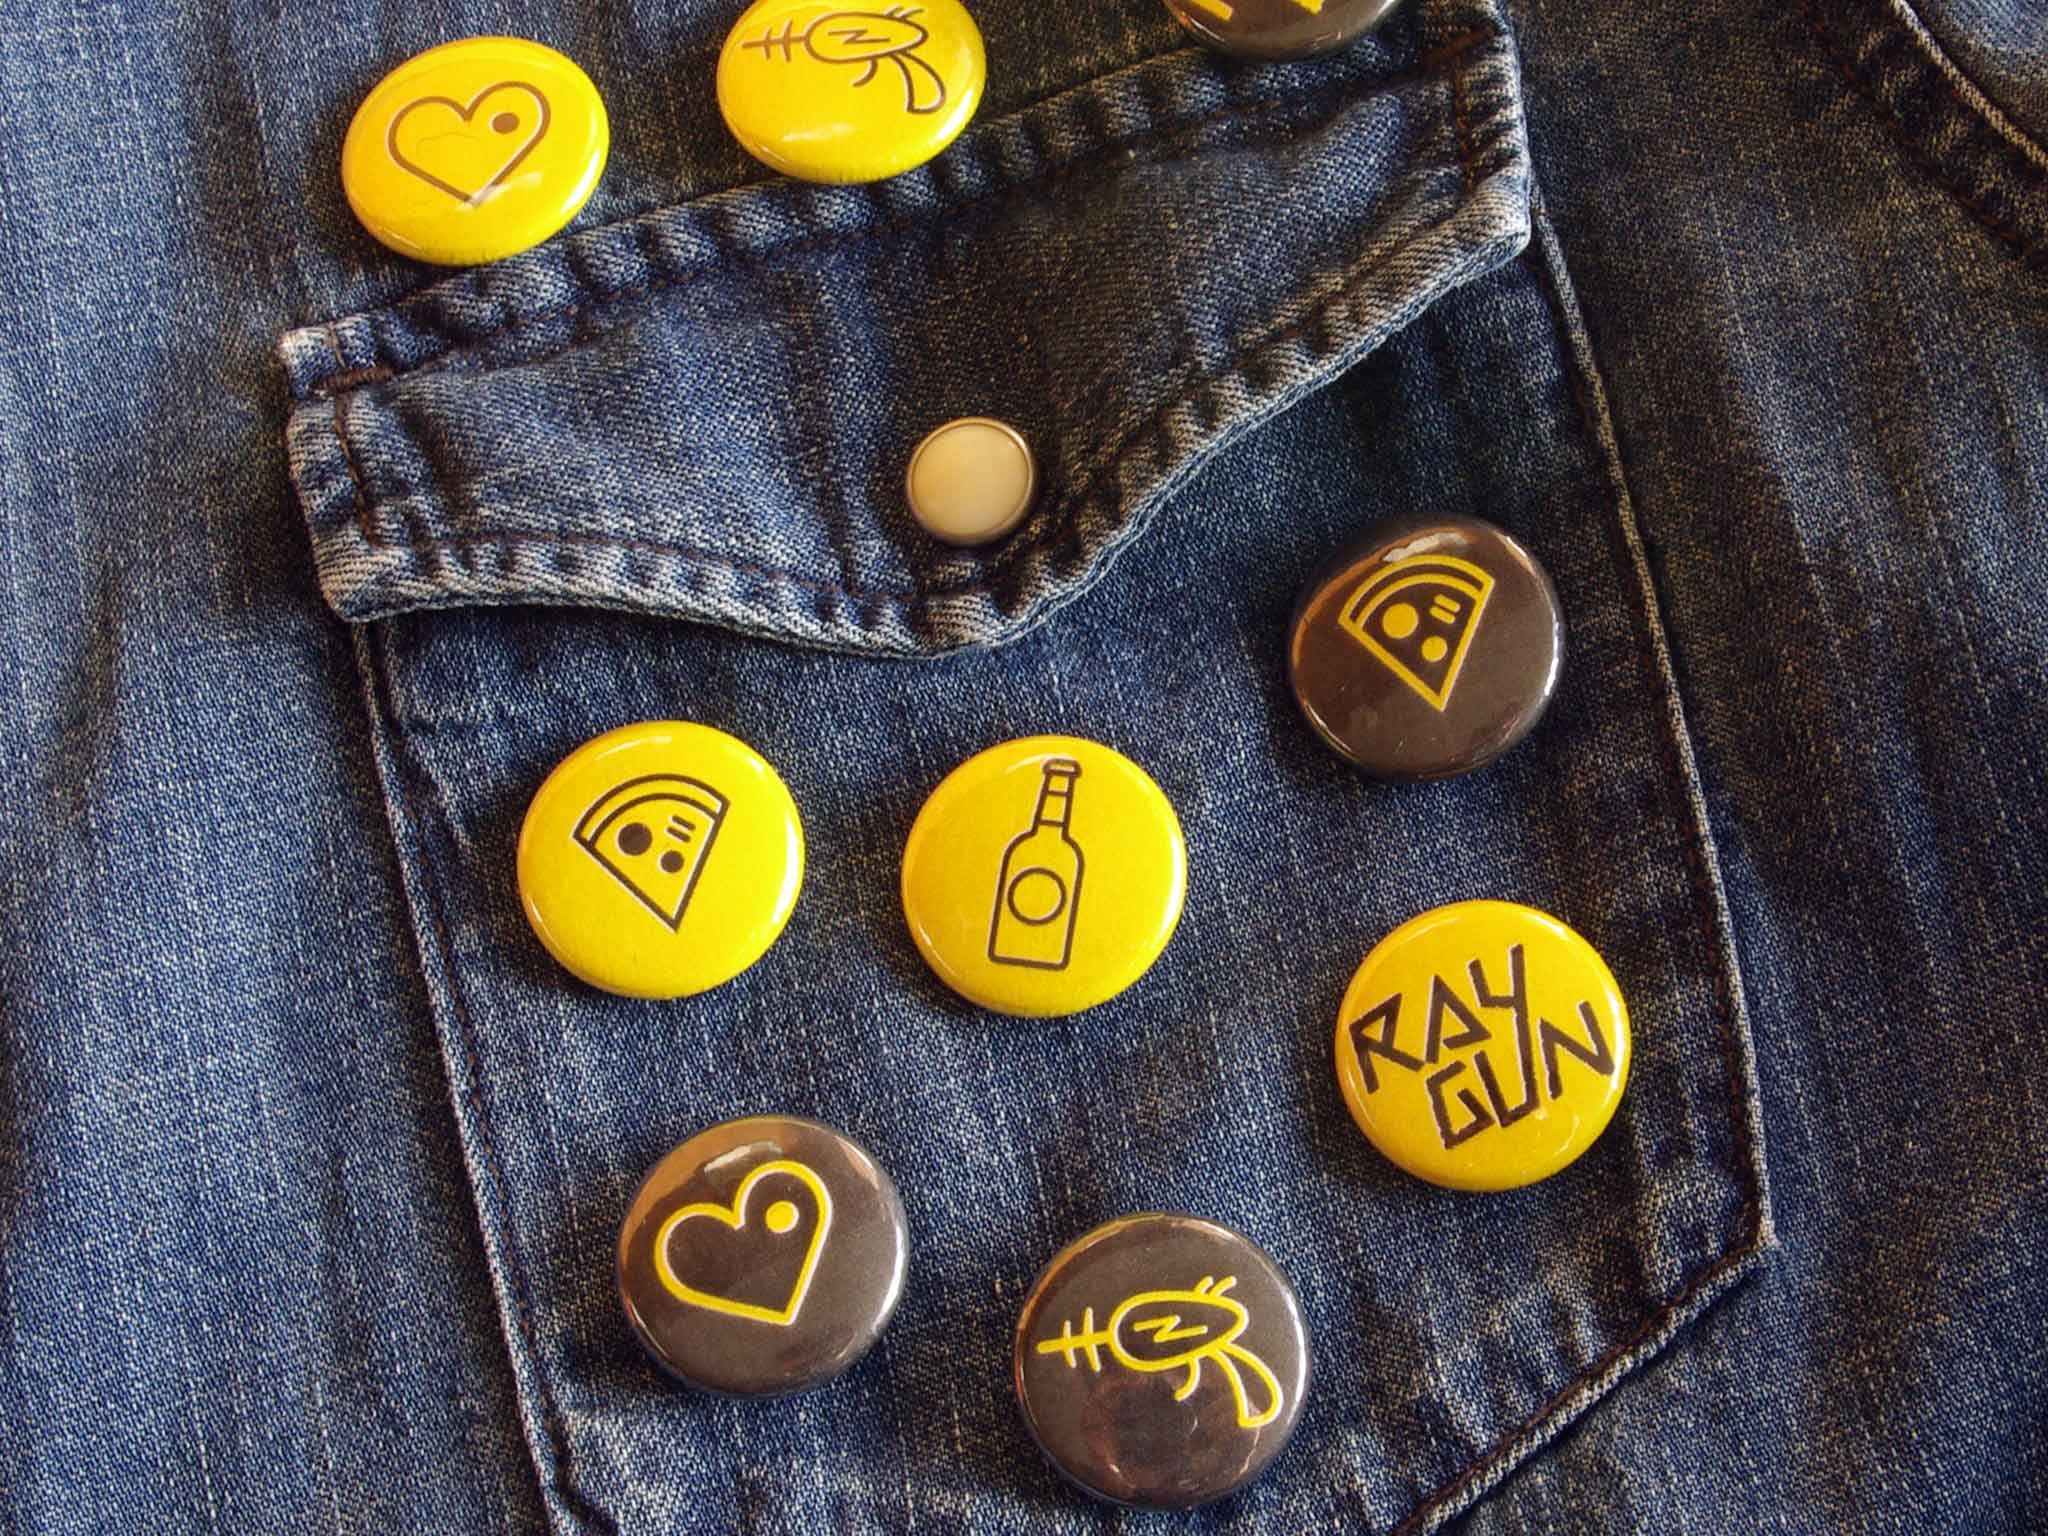 03 RayGun Buttons